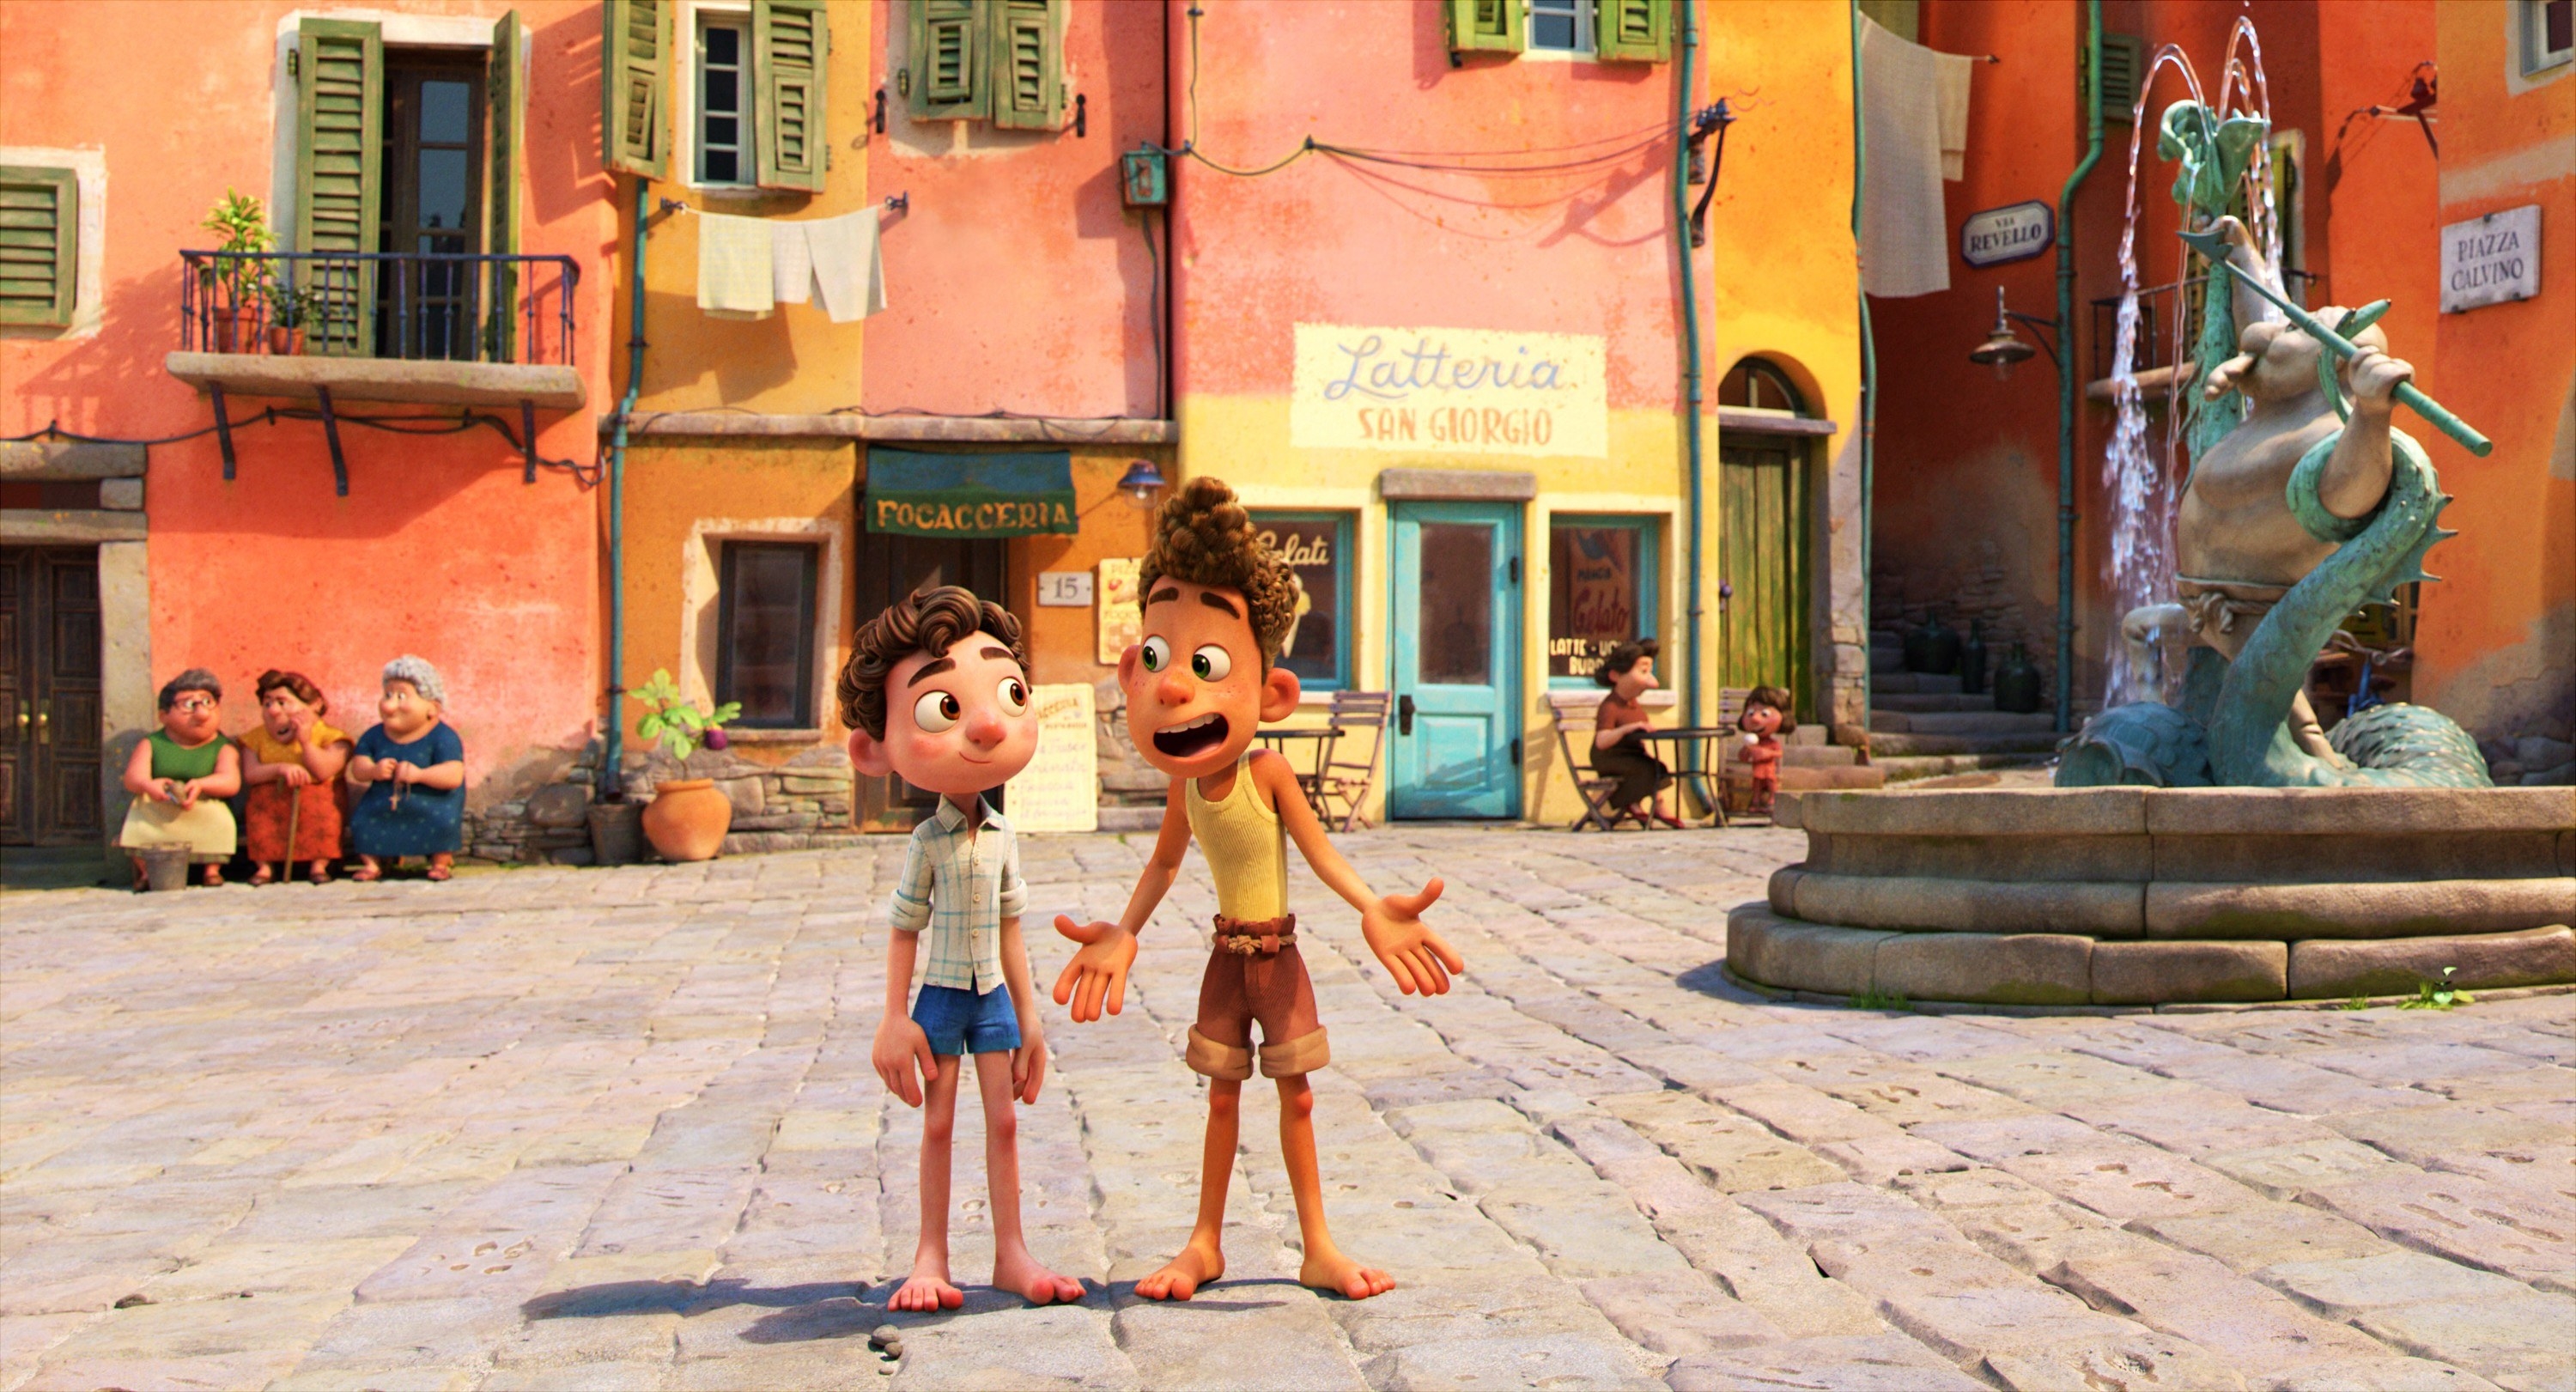 Luca and Alberto in the town square